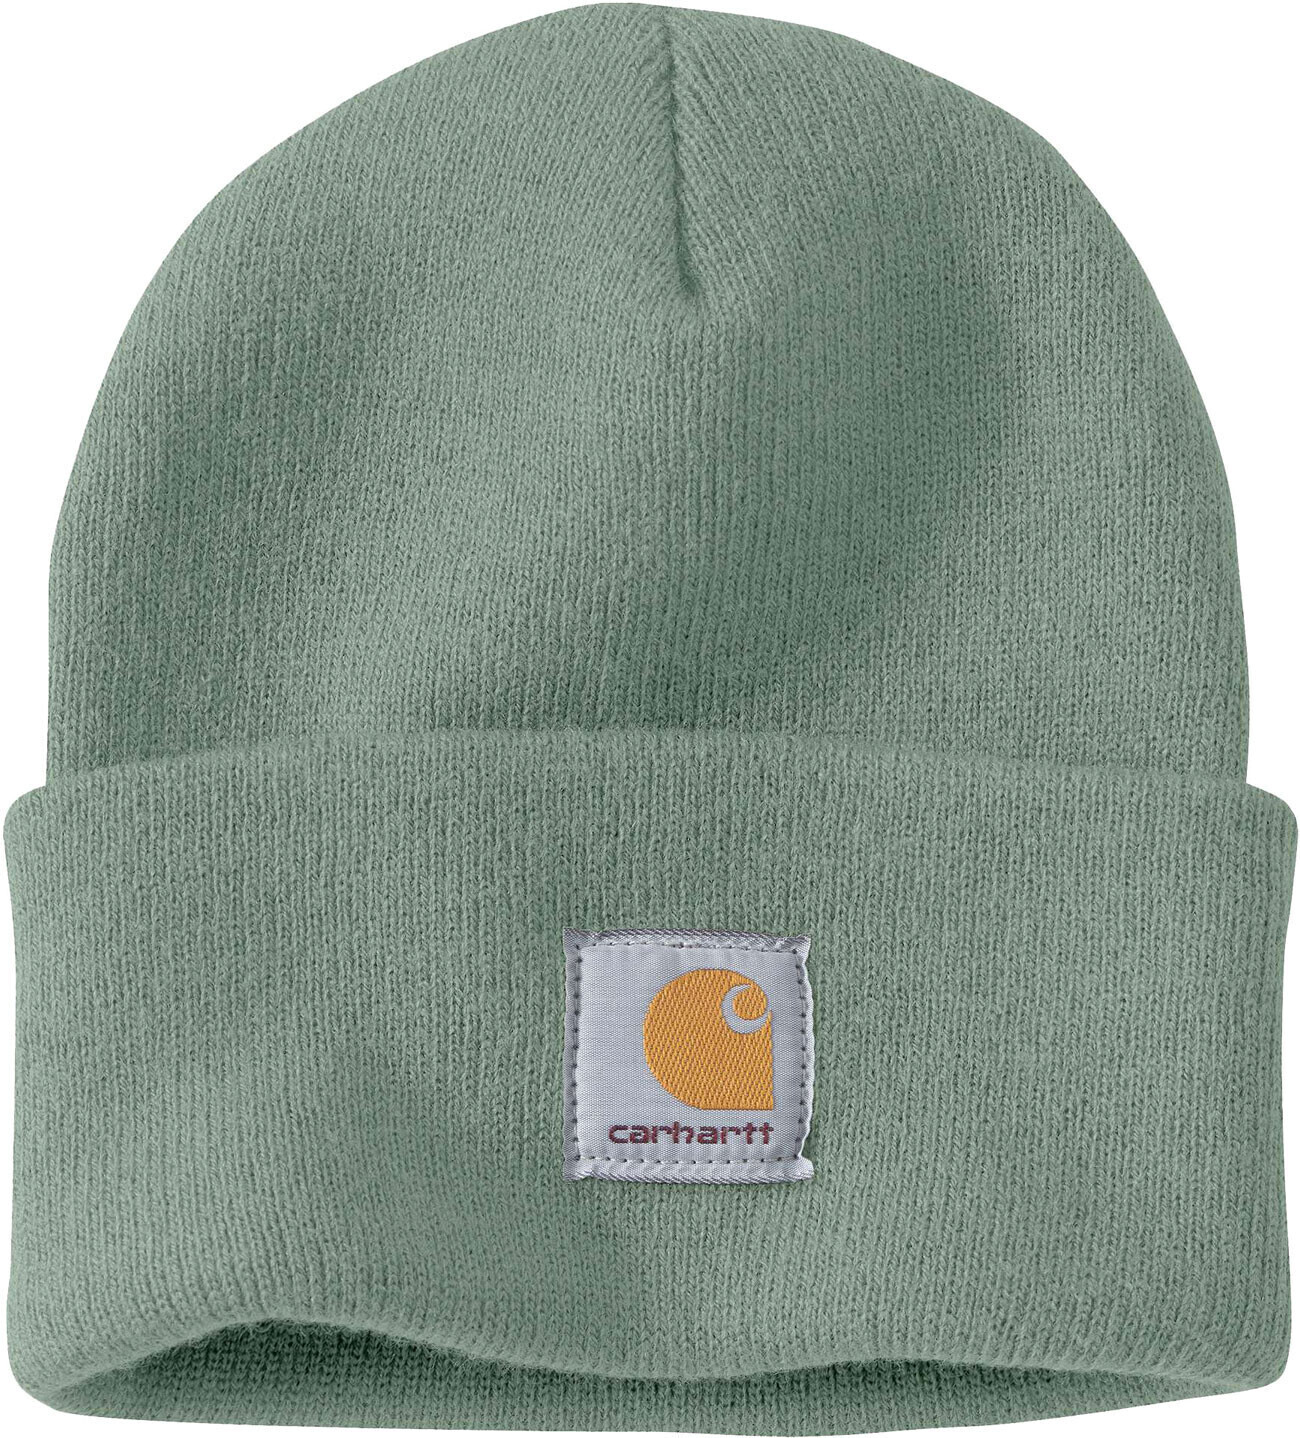 Buy Carhartt Acrylic Watch Hat A18 jade from £12.99 (Today) – Best Deals on